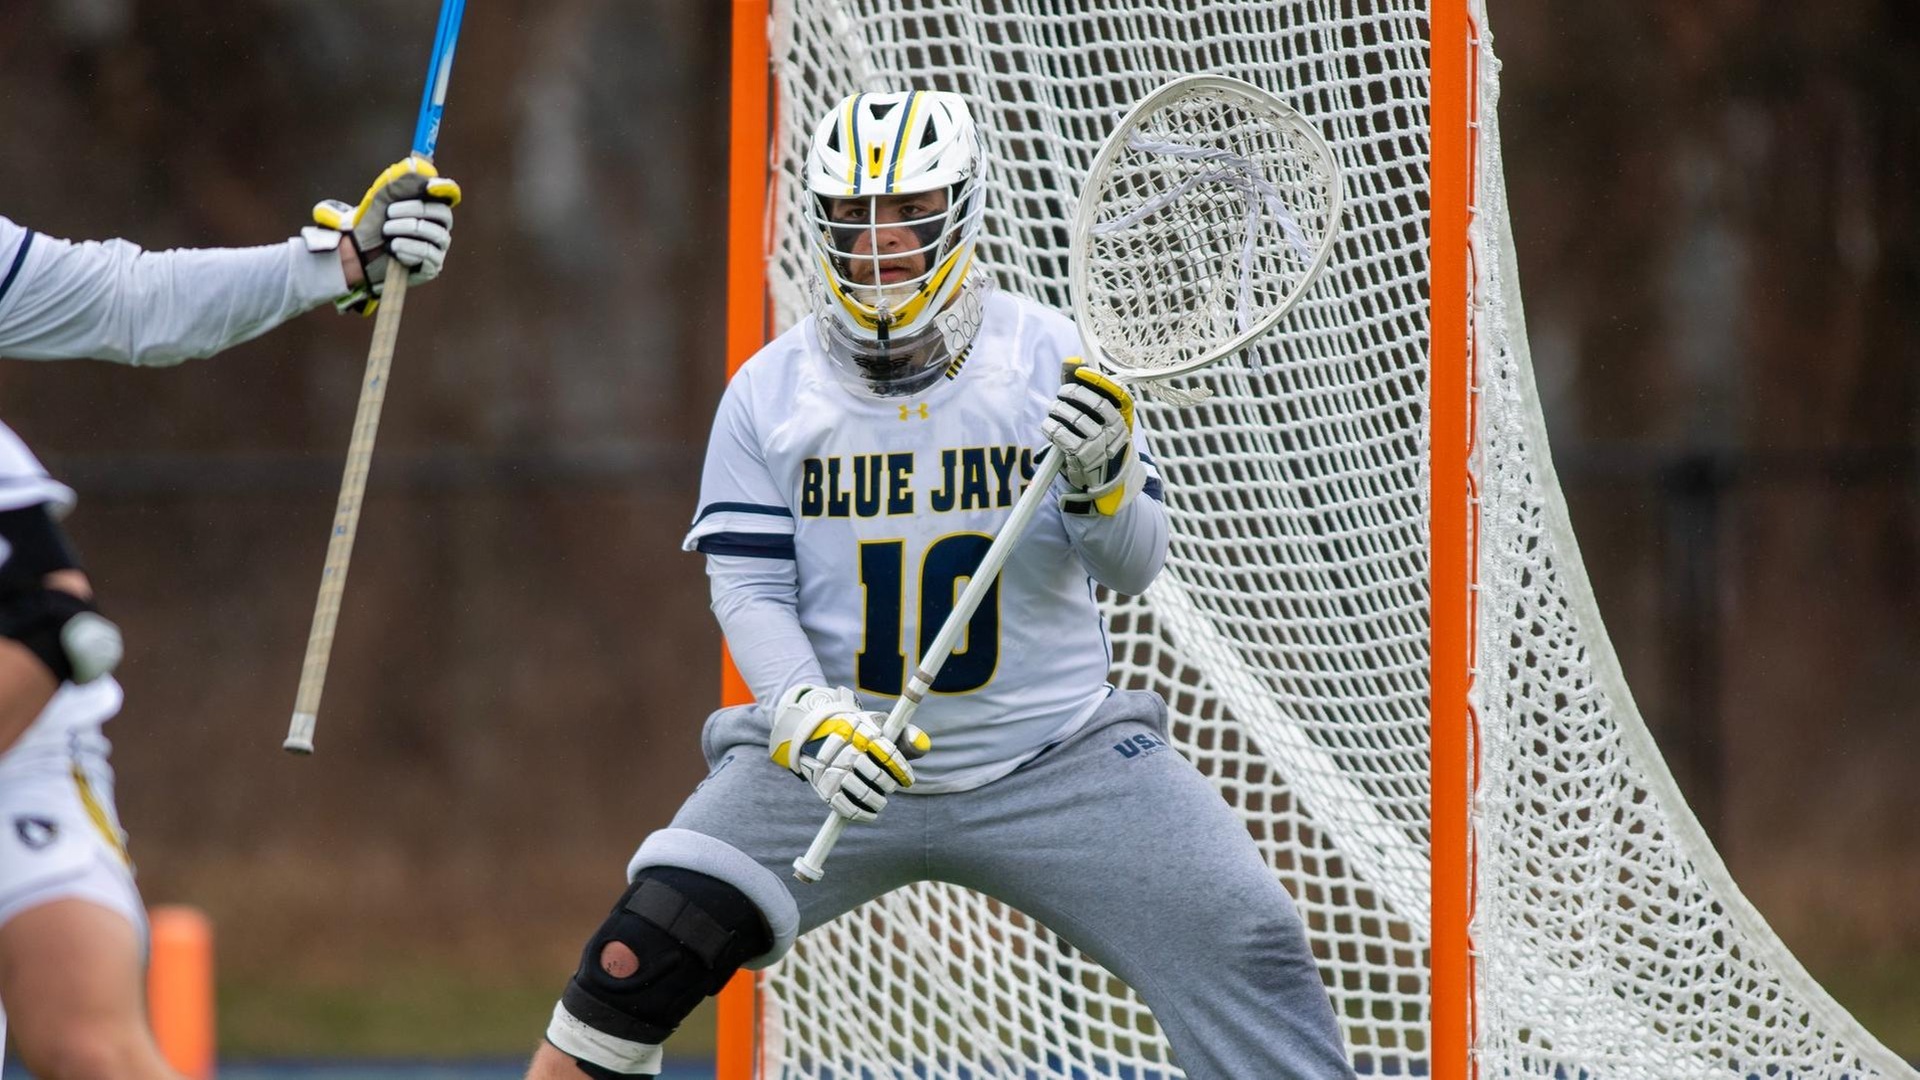 Men's Lacrosse Takes Down JWU, 11-9, at Home Tuesday Night